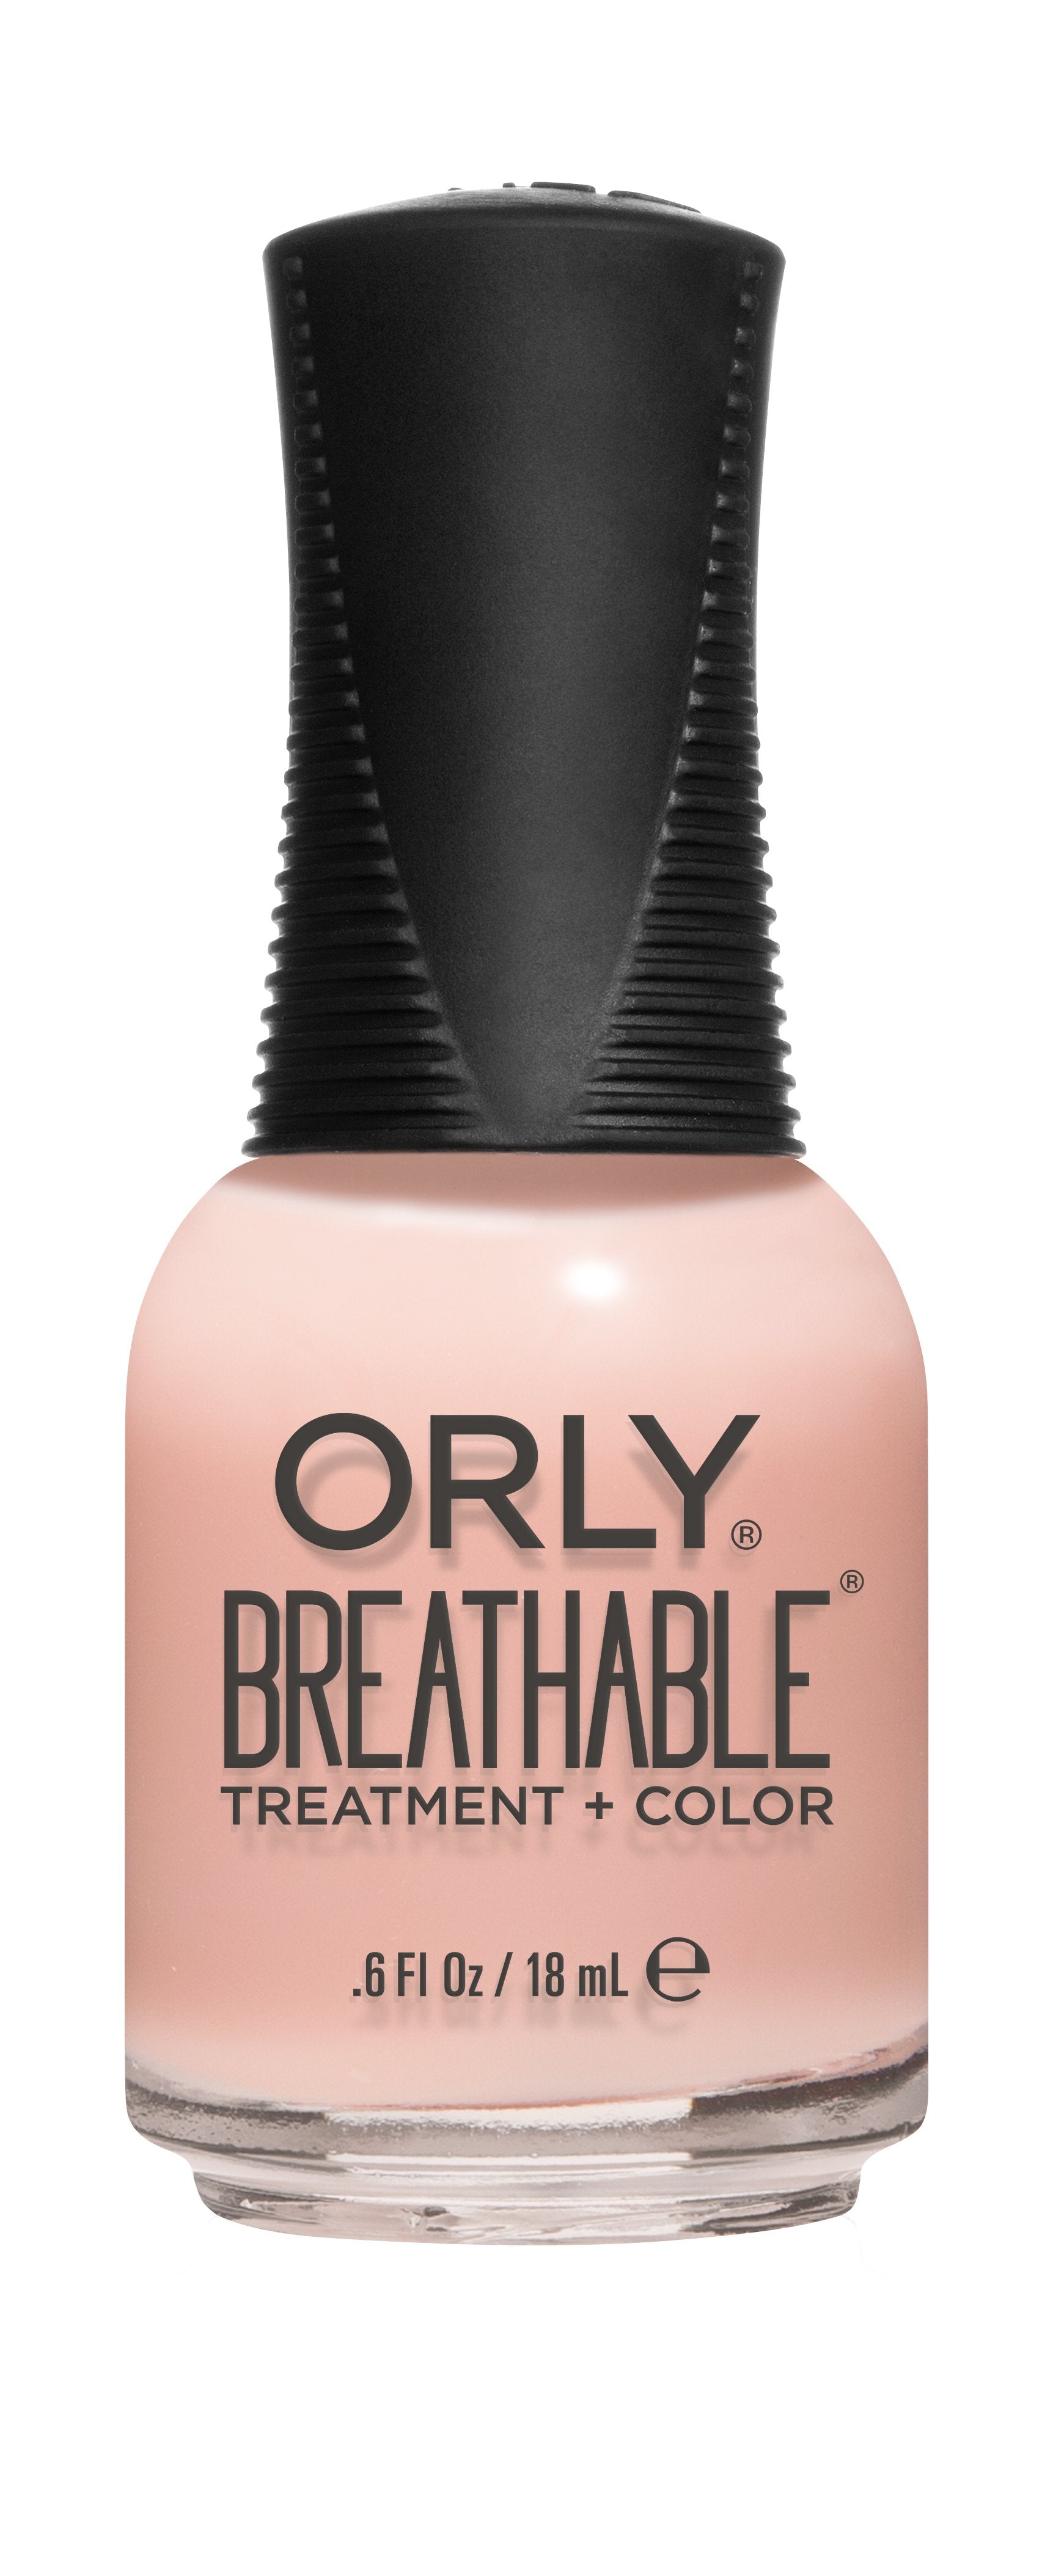 Kiss Me, I'm Kind - ORLY Breathable Treatment + Color